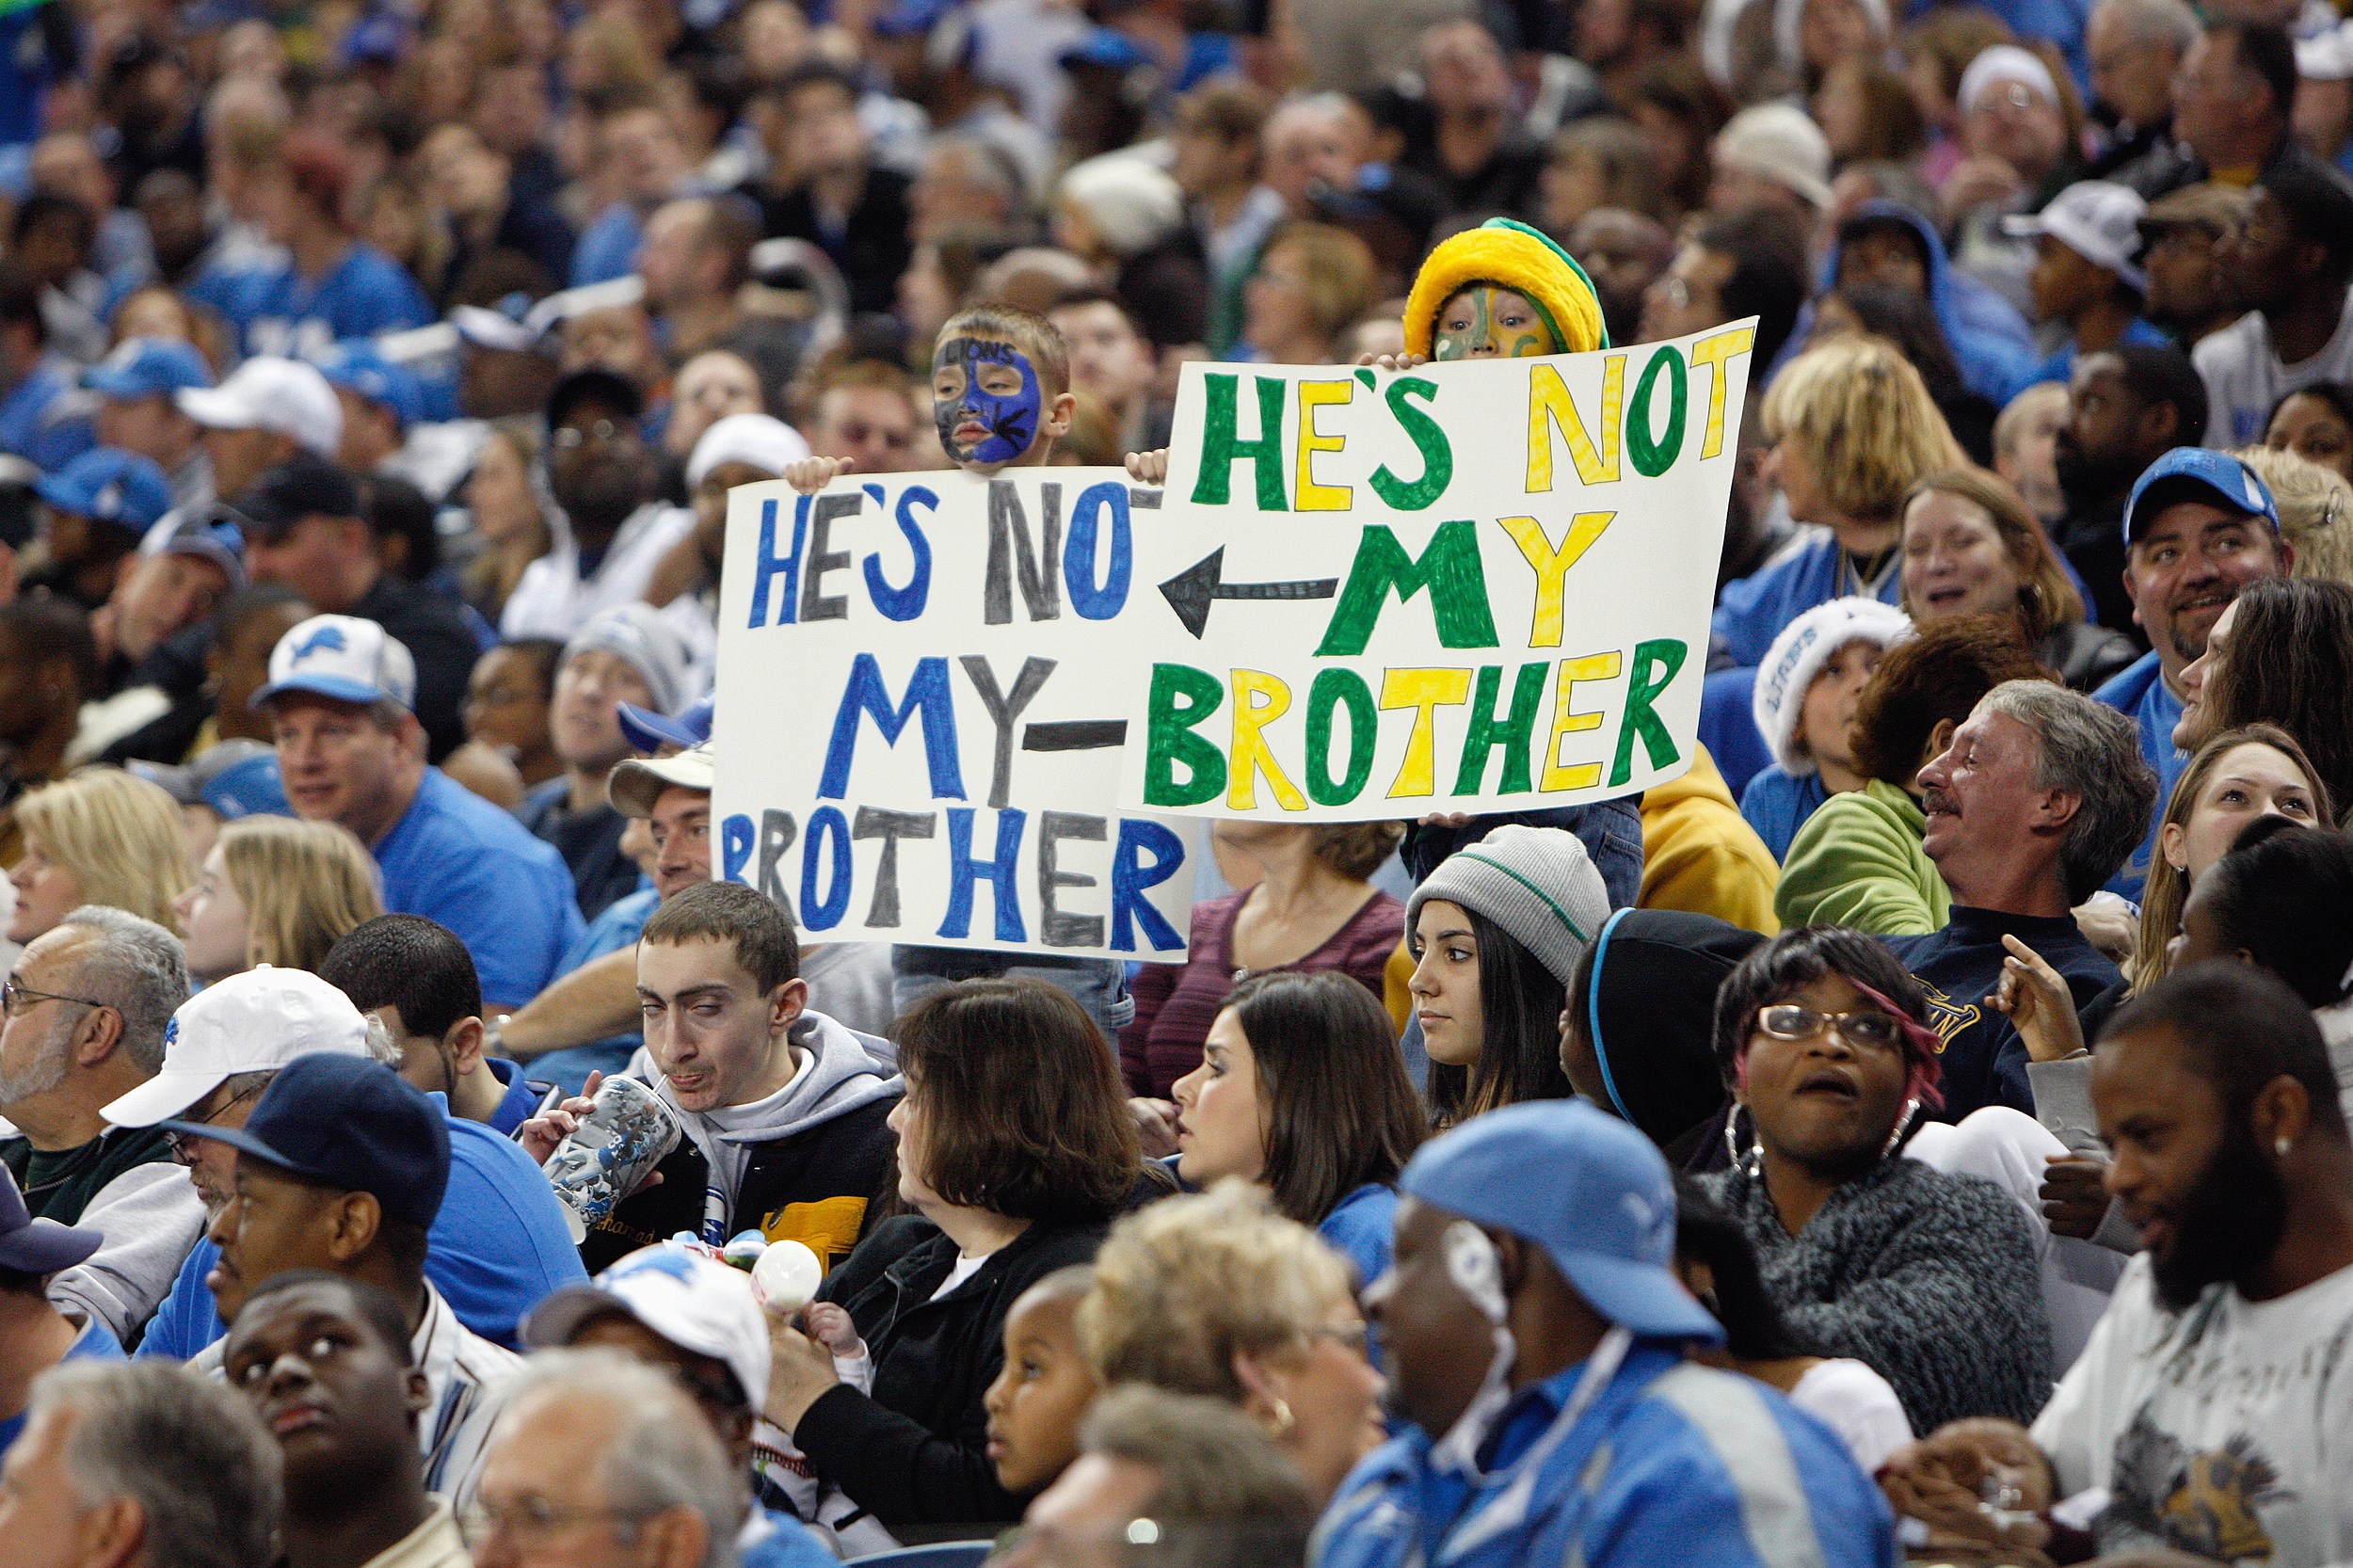 Lions fan has the perfect answer to a Cheesehead